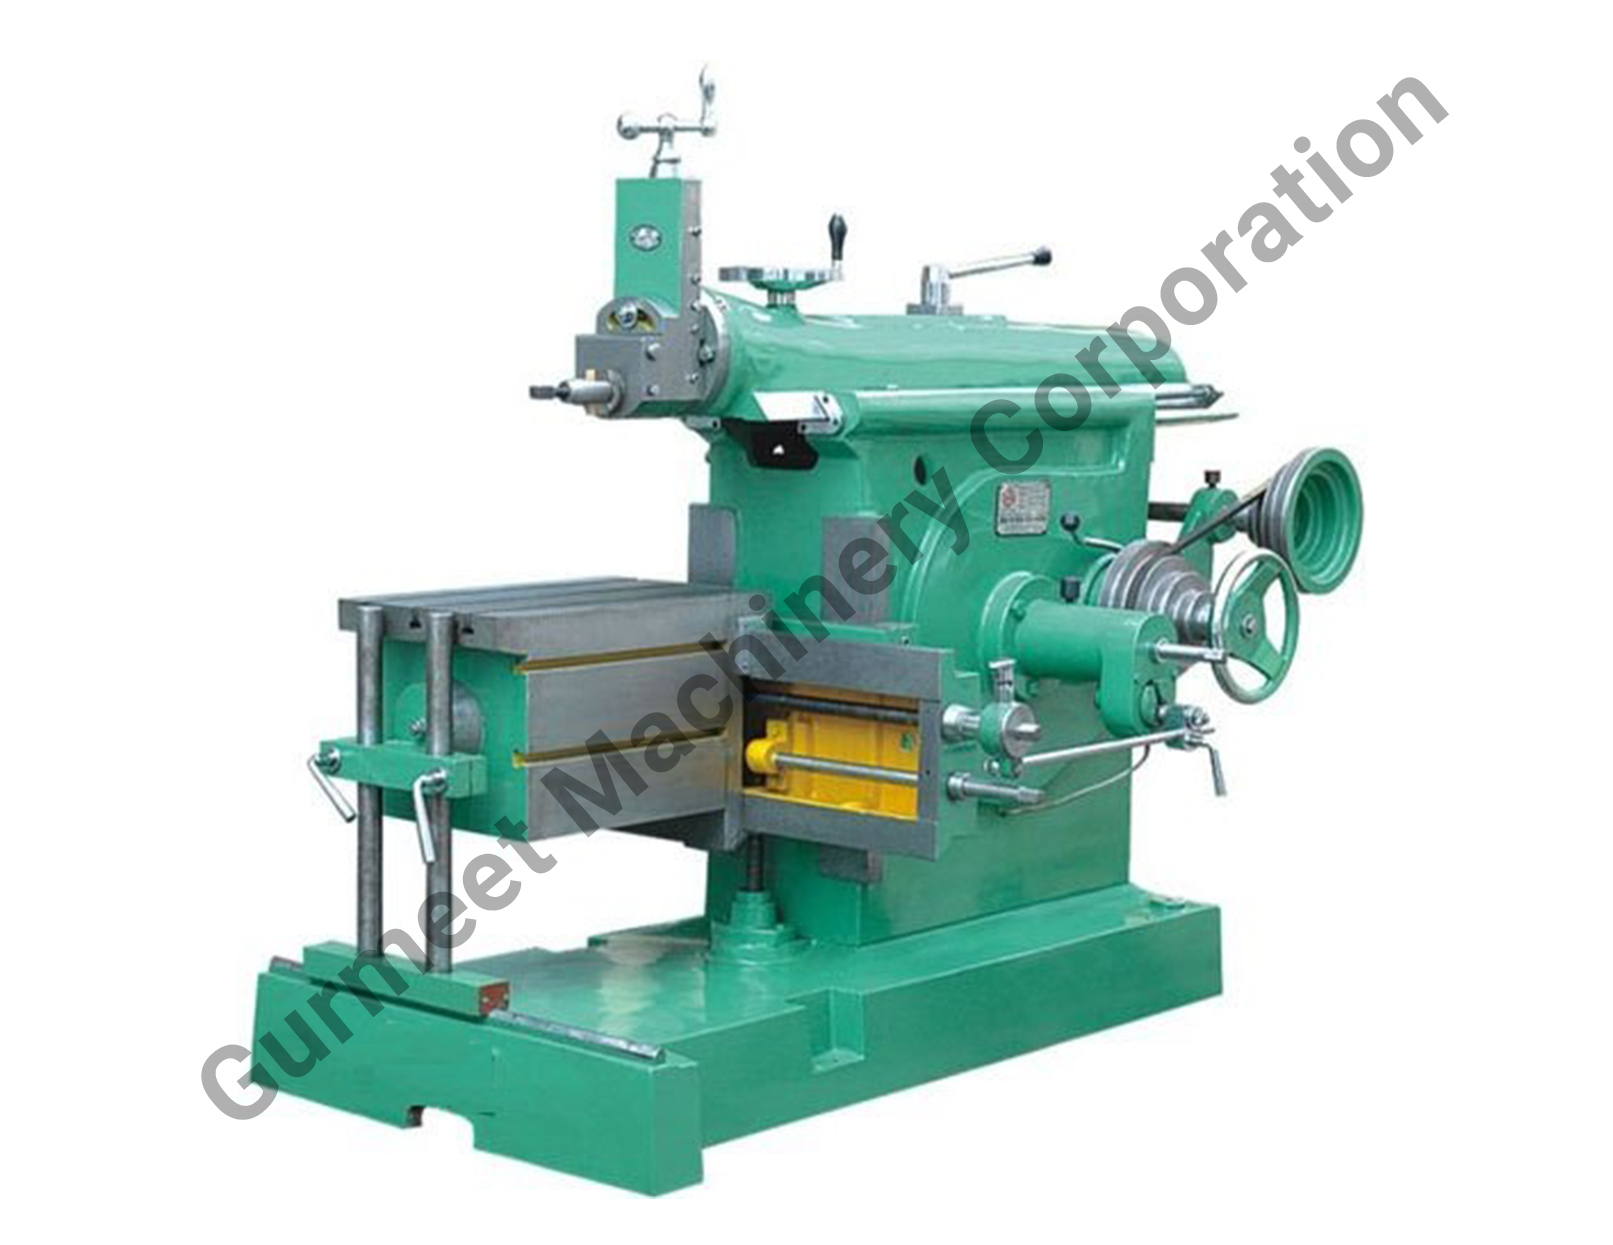 Shaper Machines, shaping machines manufacturer in India.